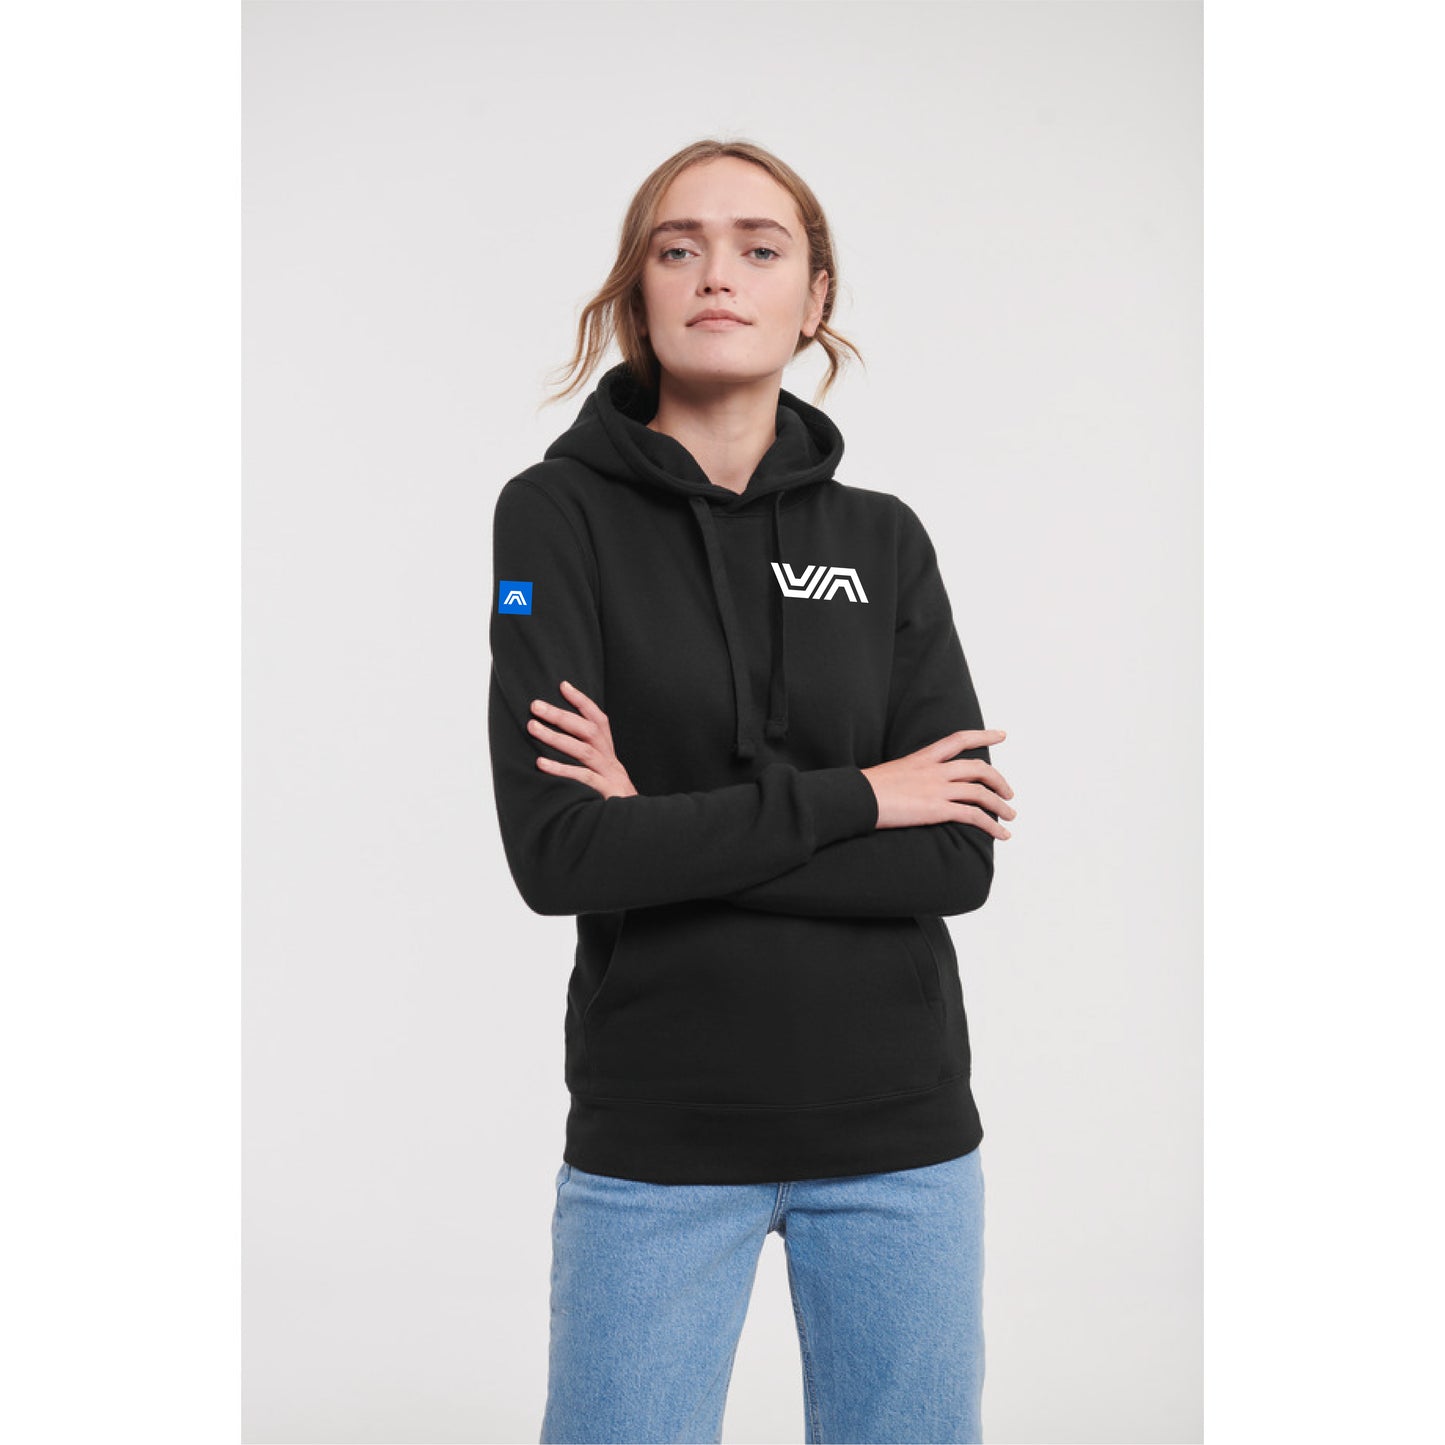 Marine Force Fluctuation Identity Hoodie